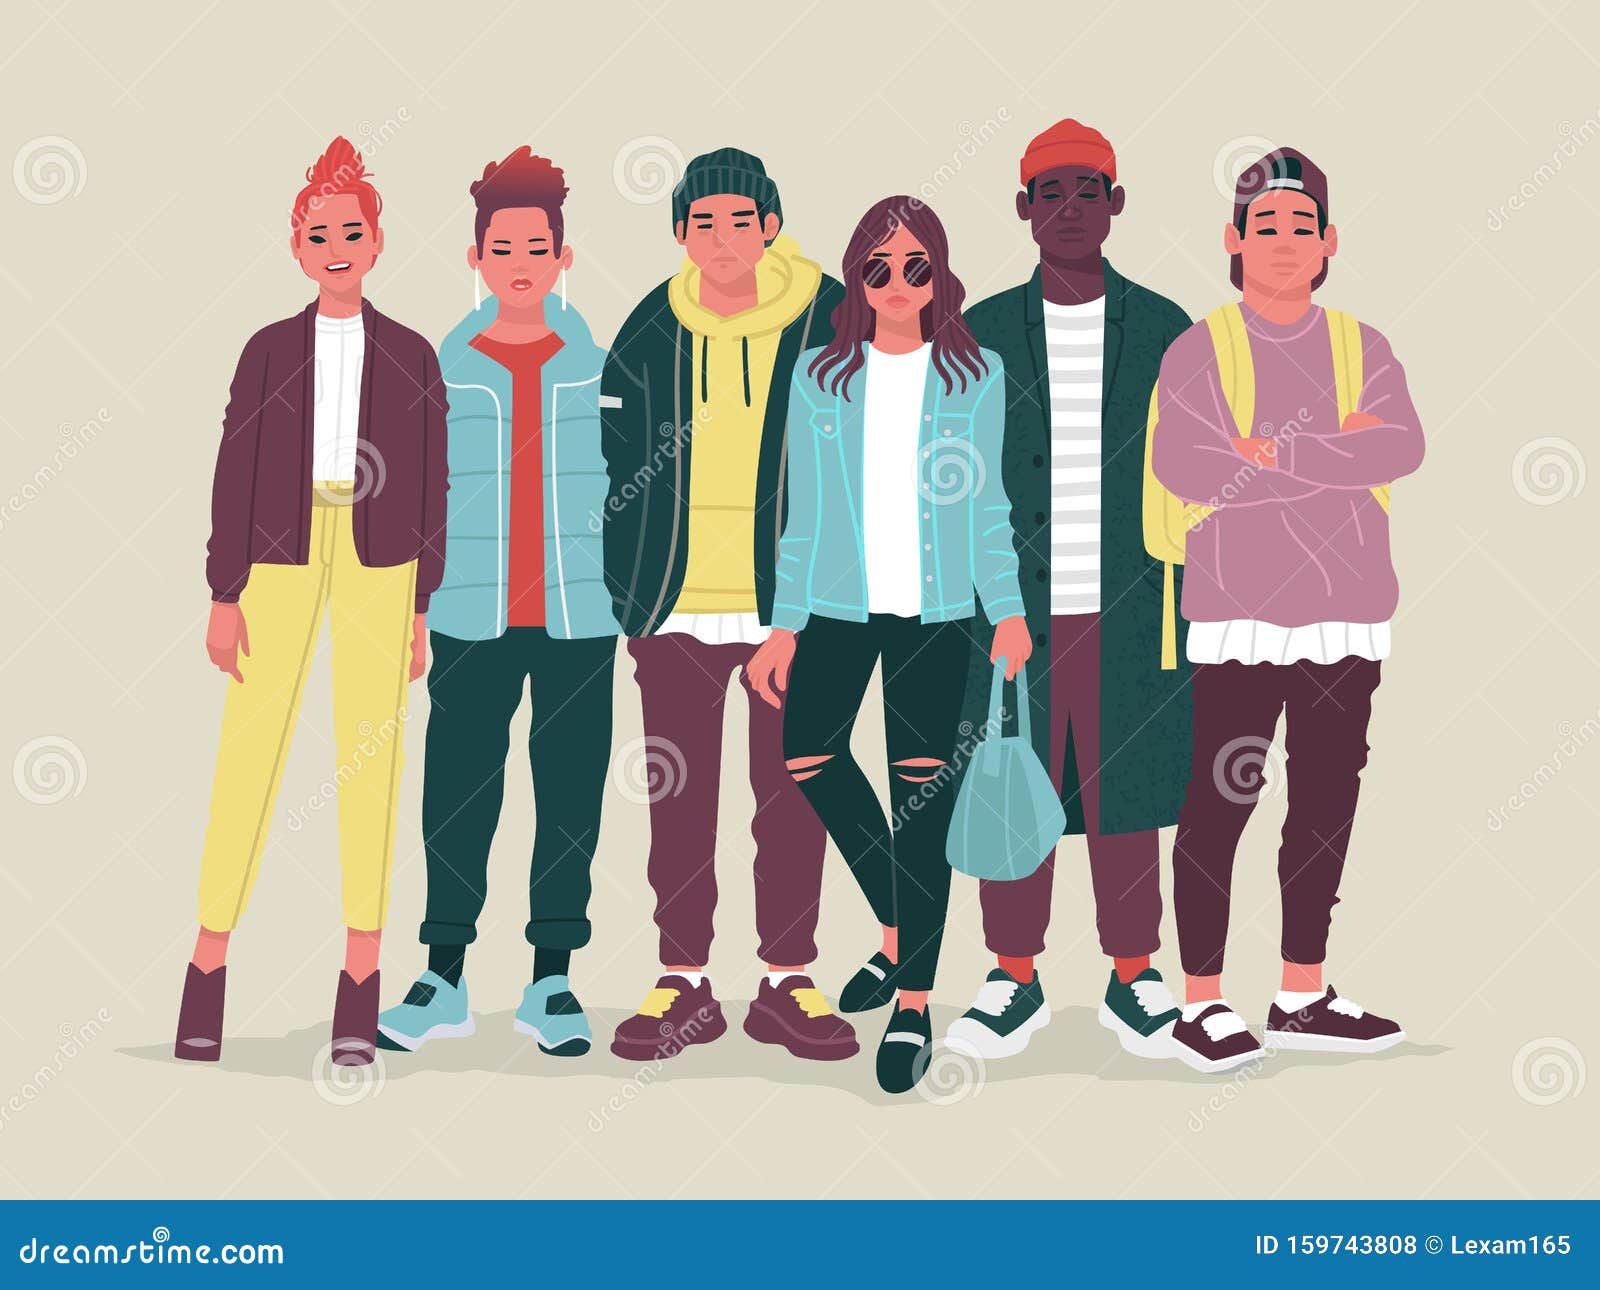 group of young people dressed in trendy street style clothes. girls and boys in fashionable outfits